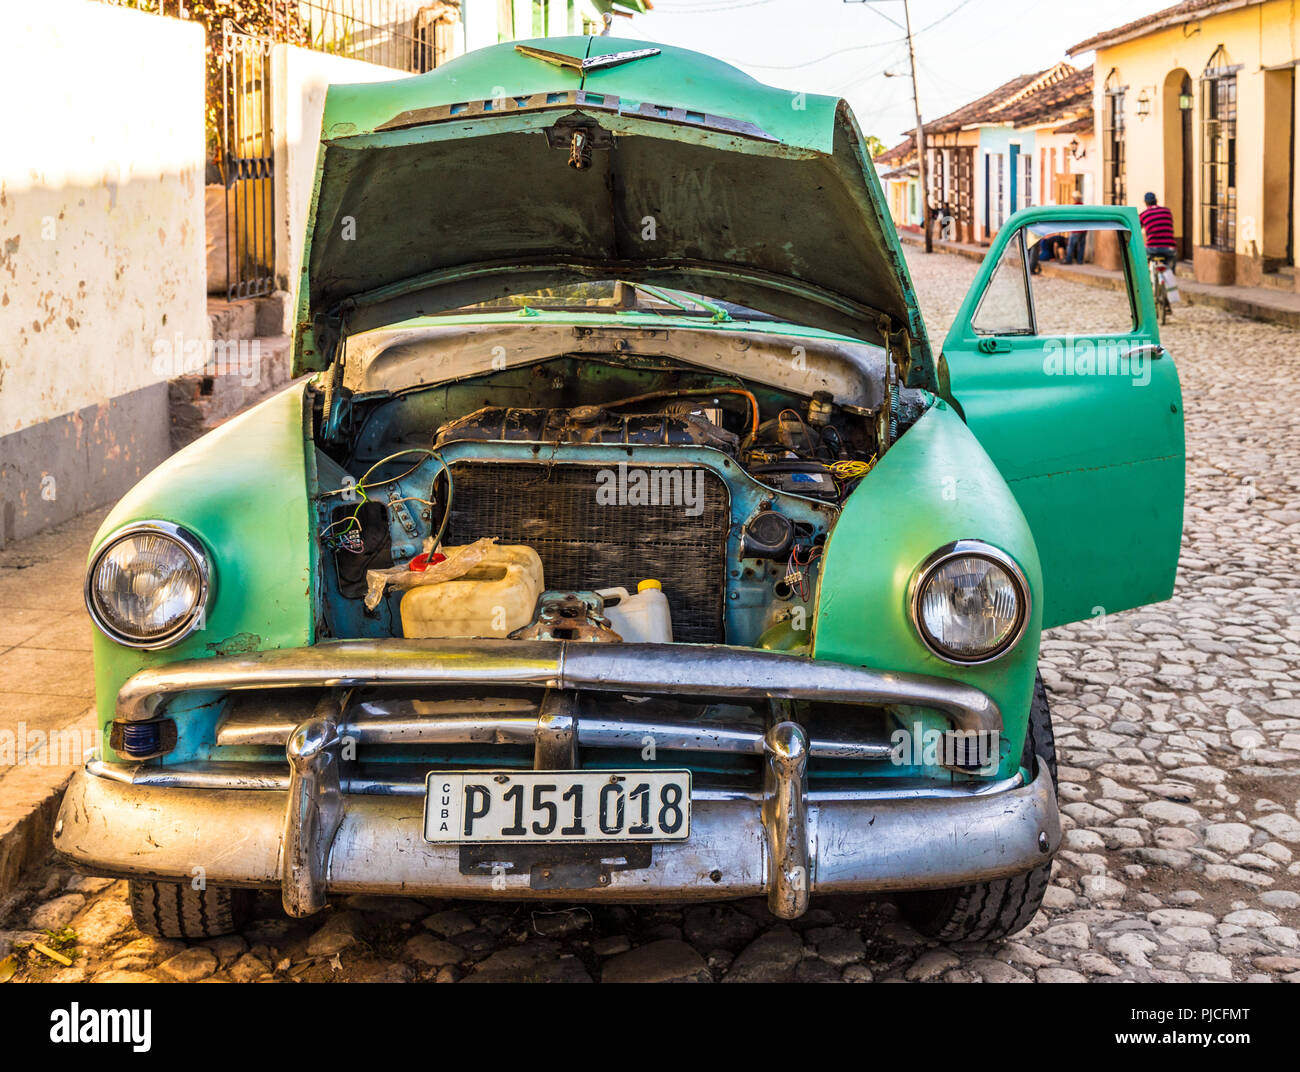 A typical view in Trinidad in Cuba Stock Photo